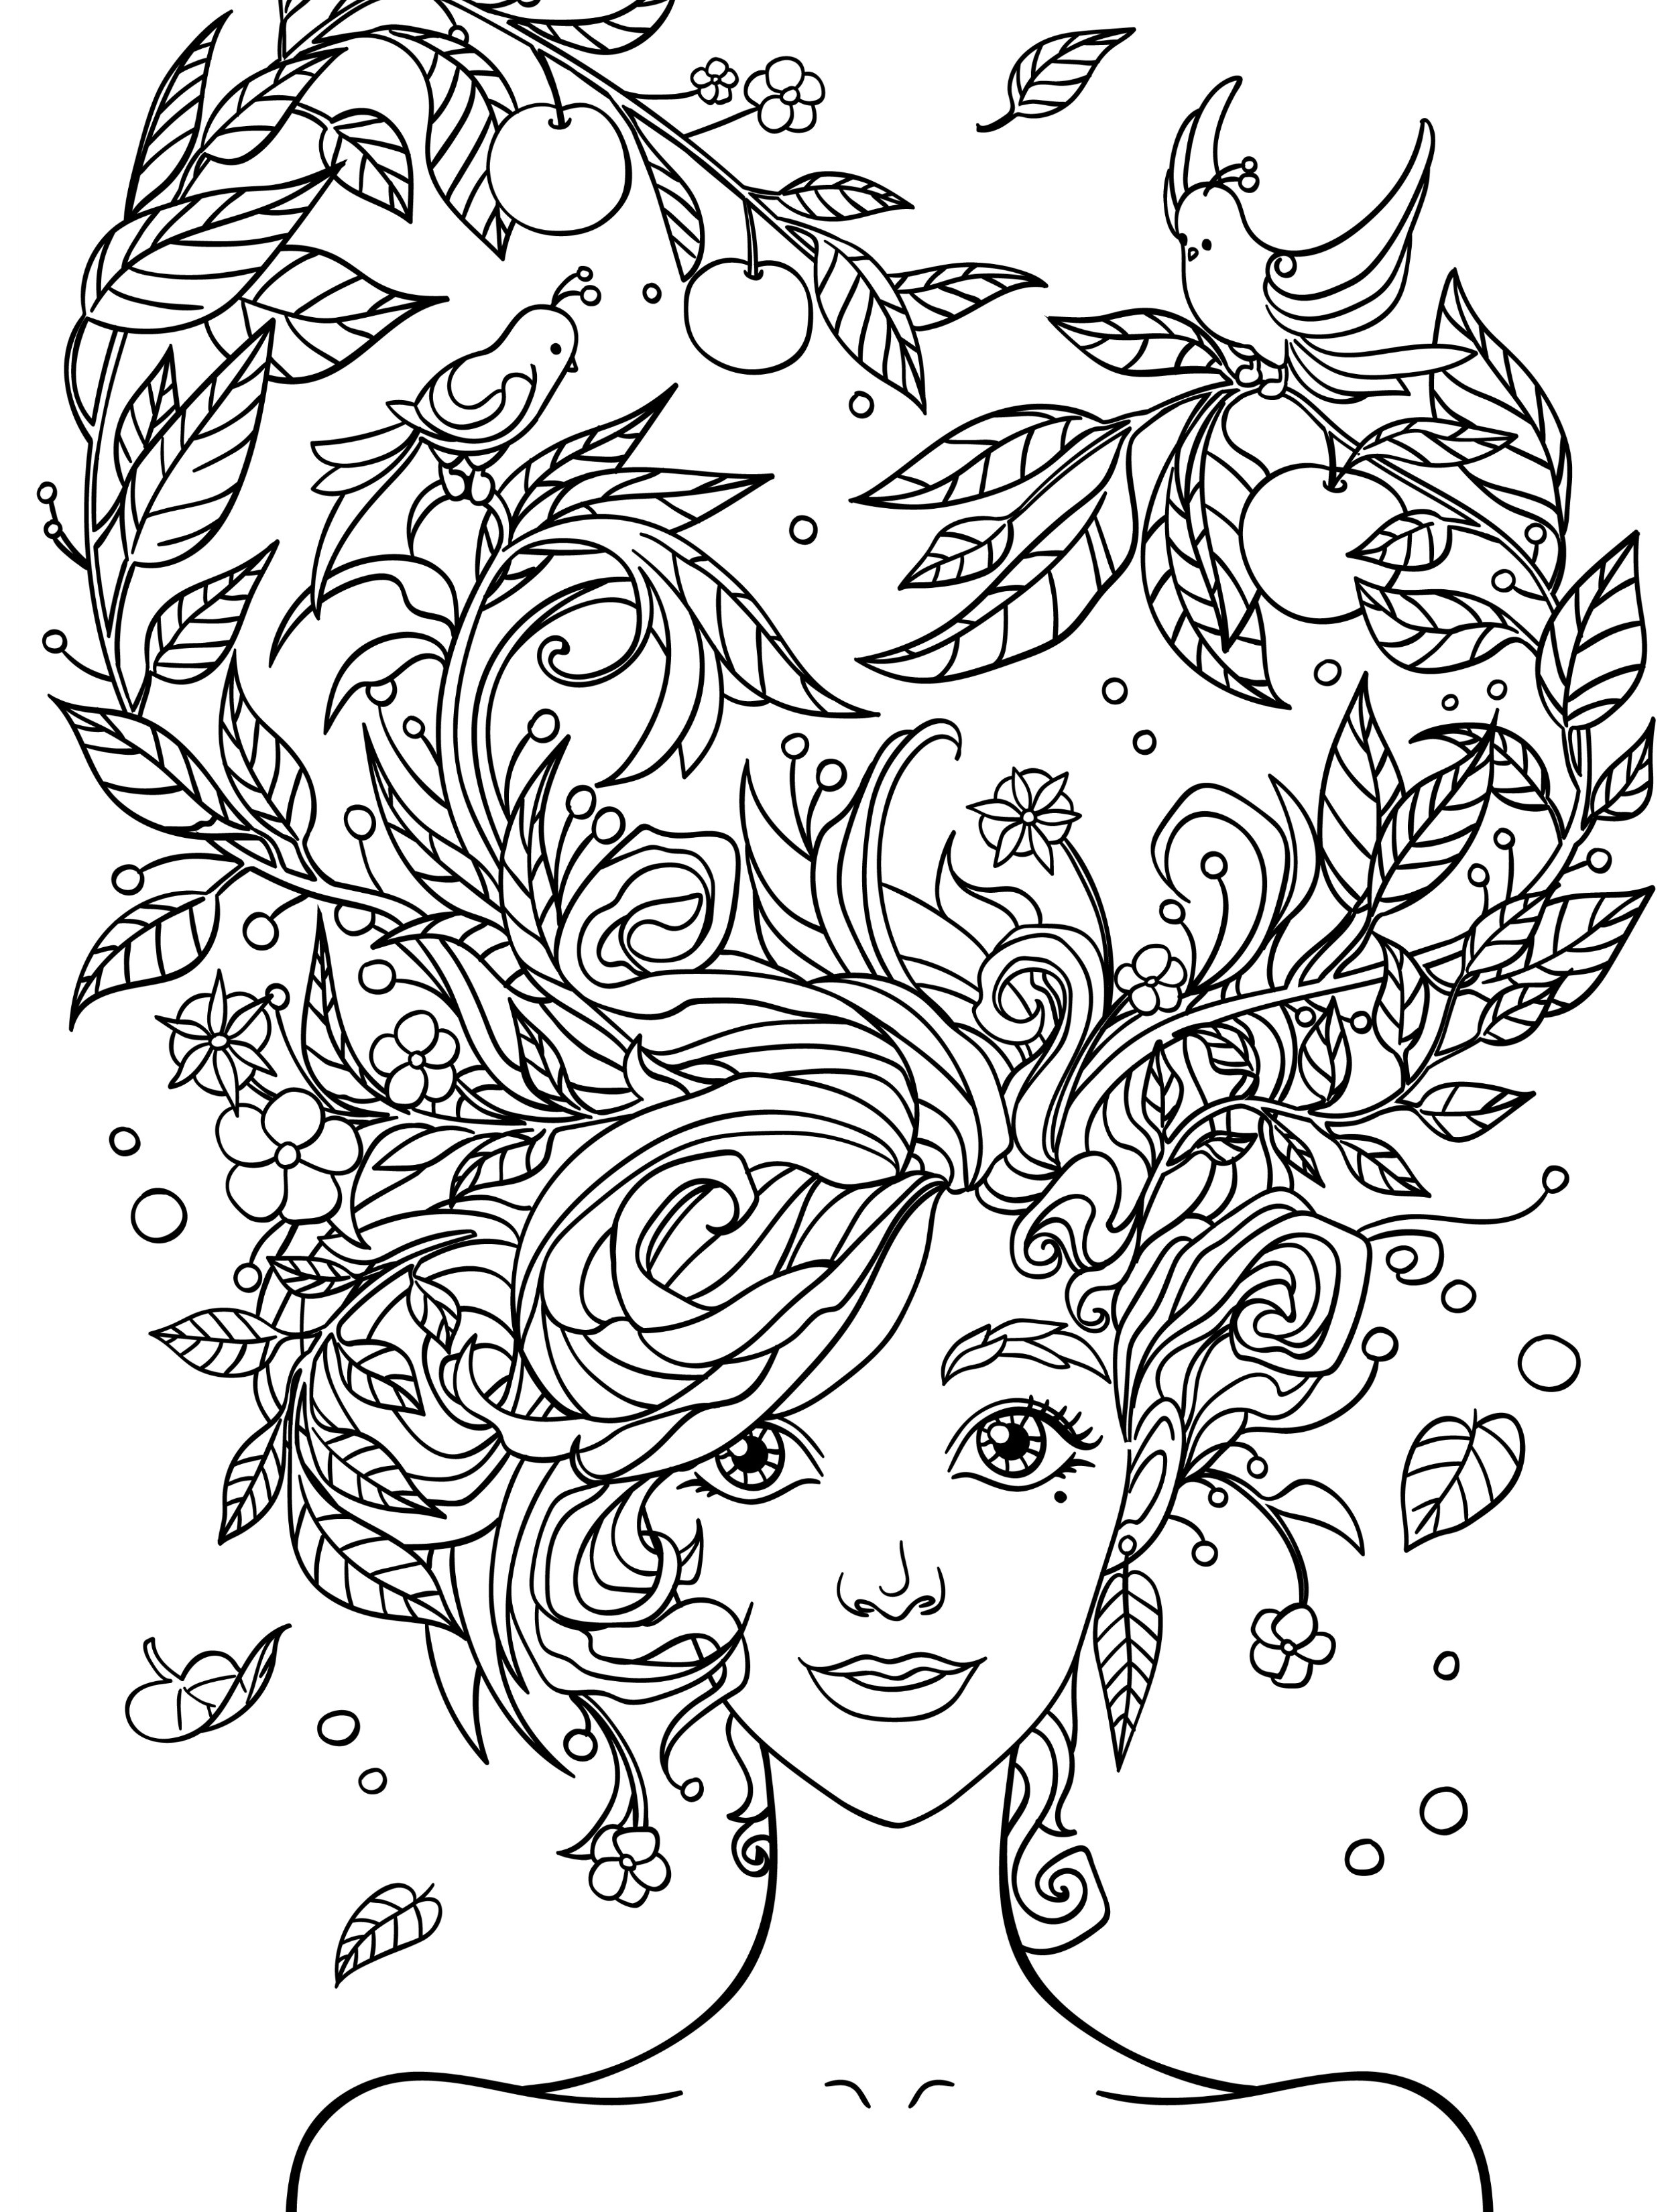 People Coloring Pages For Adults
 10 Crazy Hair Adult Coloring Pages Page 5 of 12 Nerdy